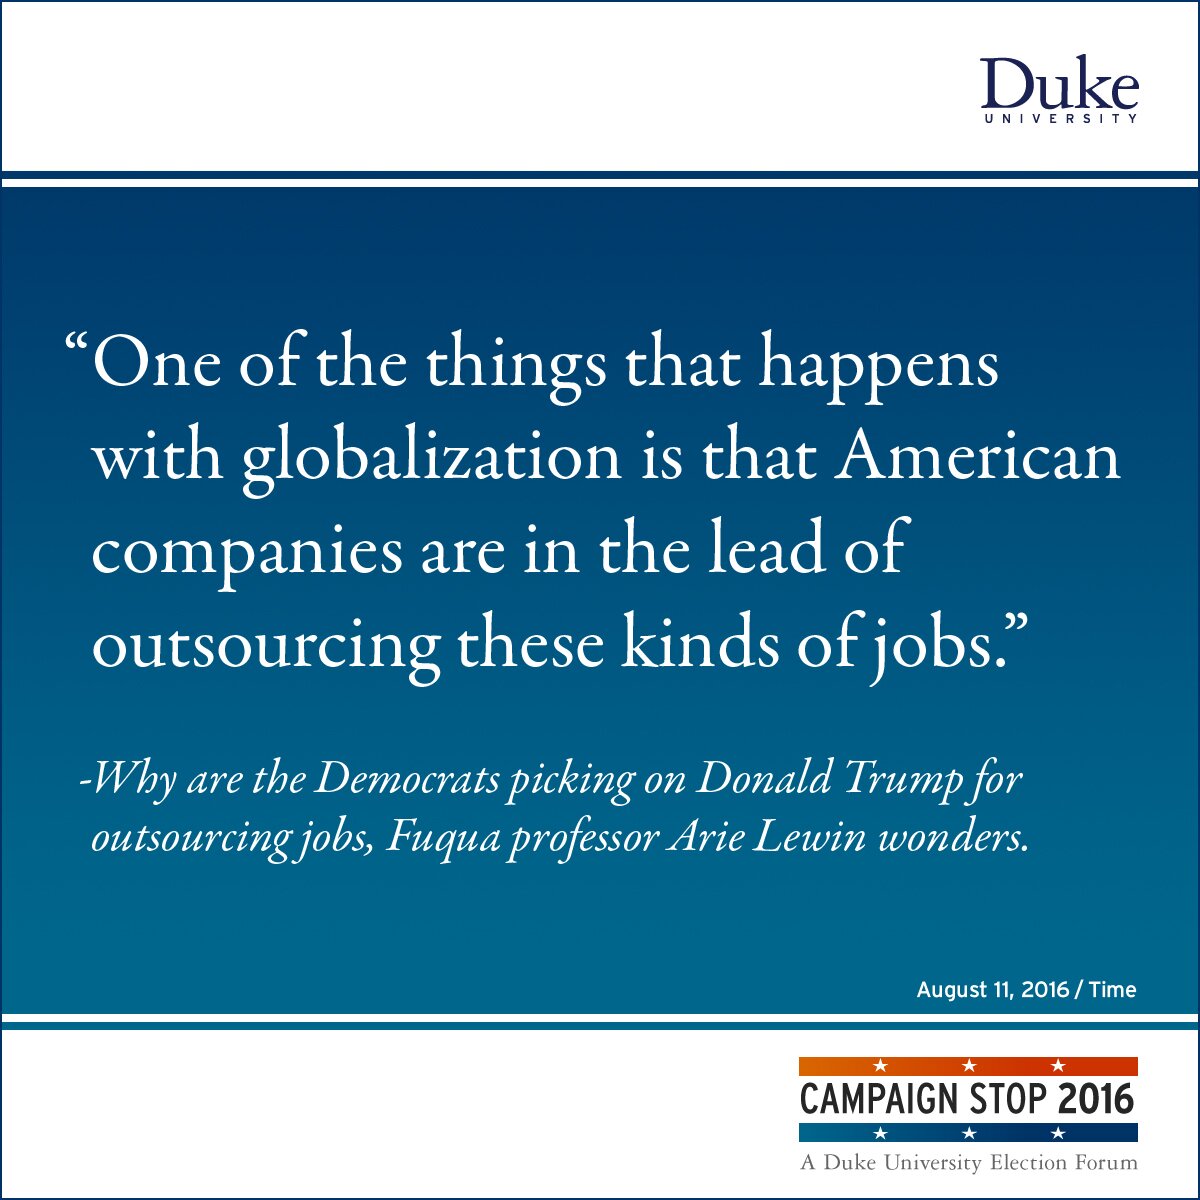 “One of the things that happens with globalization is that American companies are in the lead of outsourcing these kinds of jobs.” -Why are the Democrats picking on Donald Trump for outsourcing jobs, Fuqua professor Arie Lewin wonders.